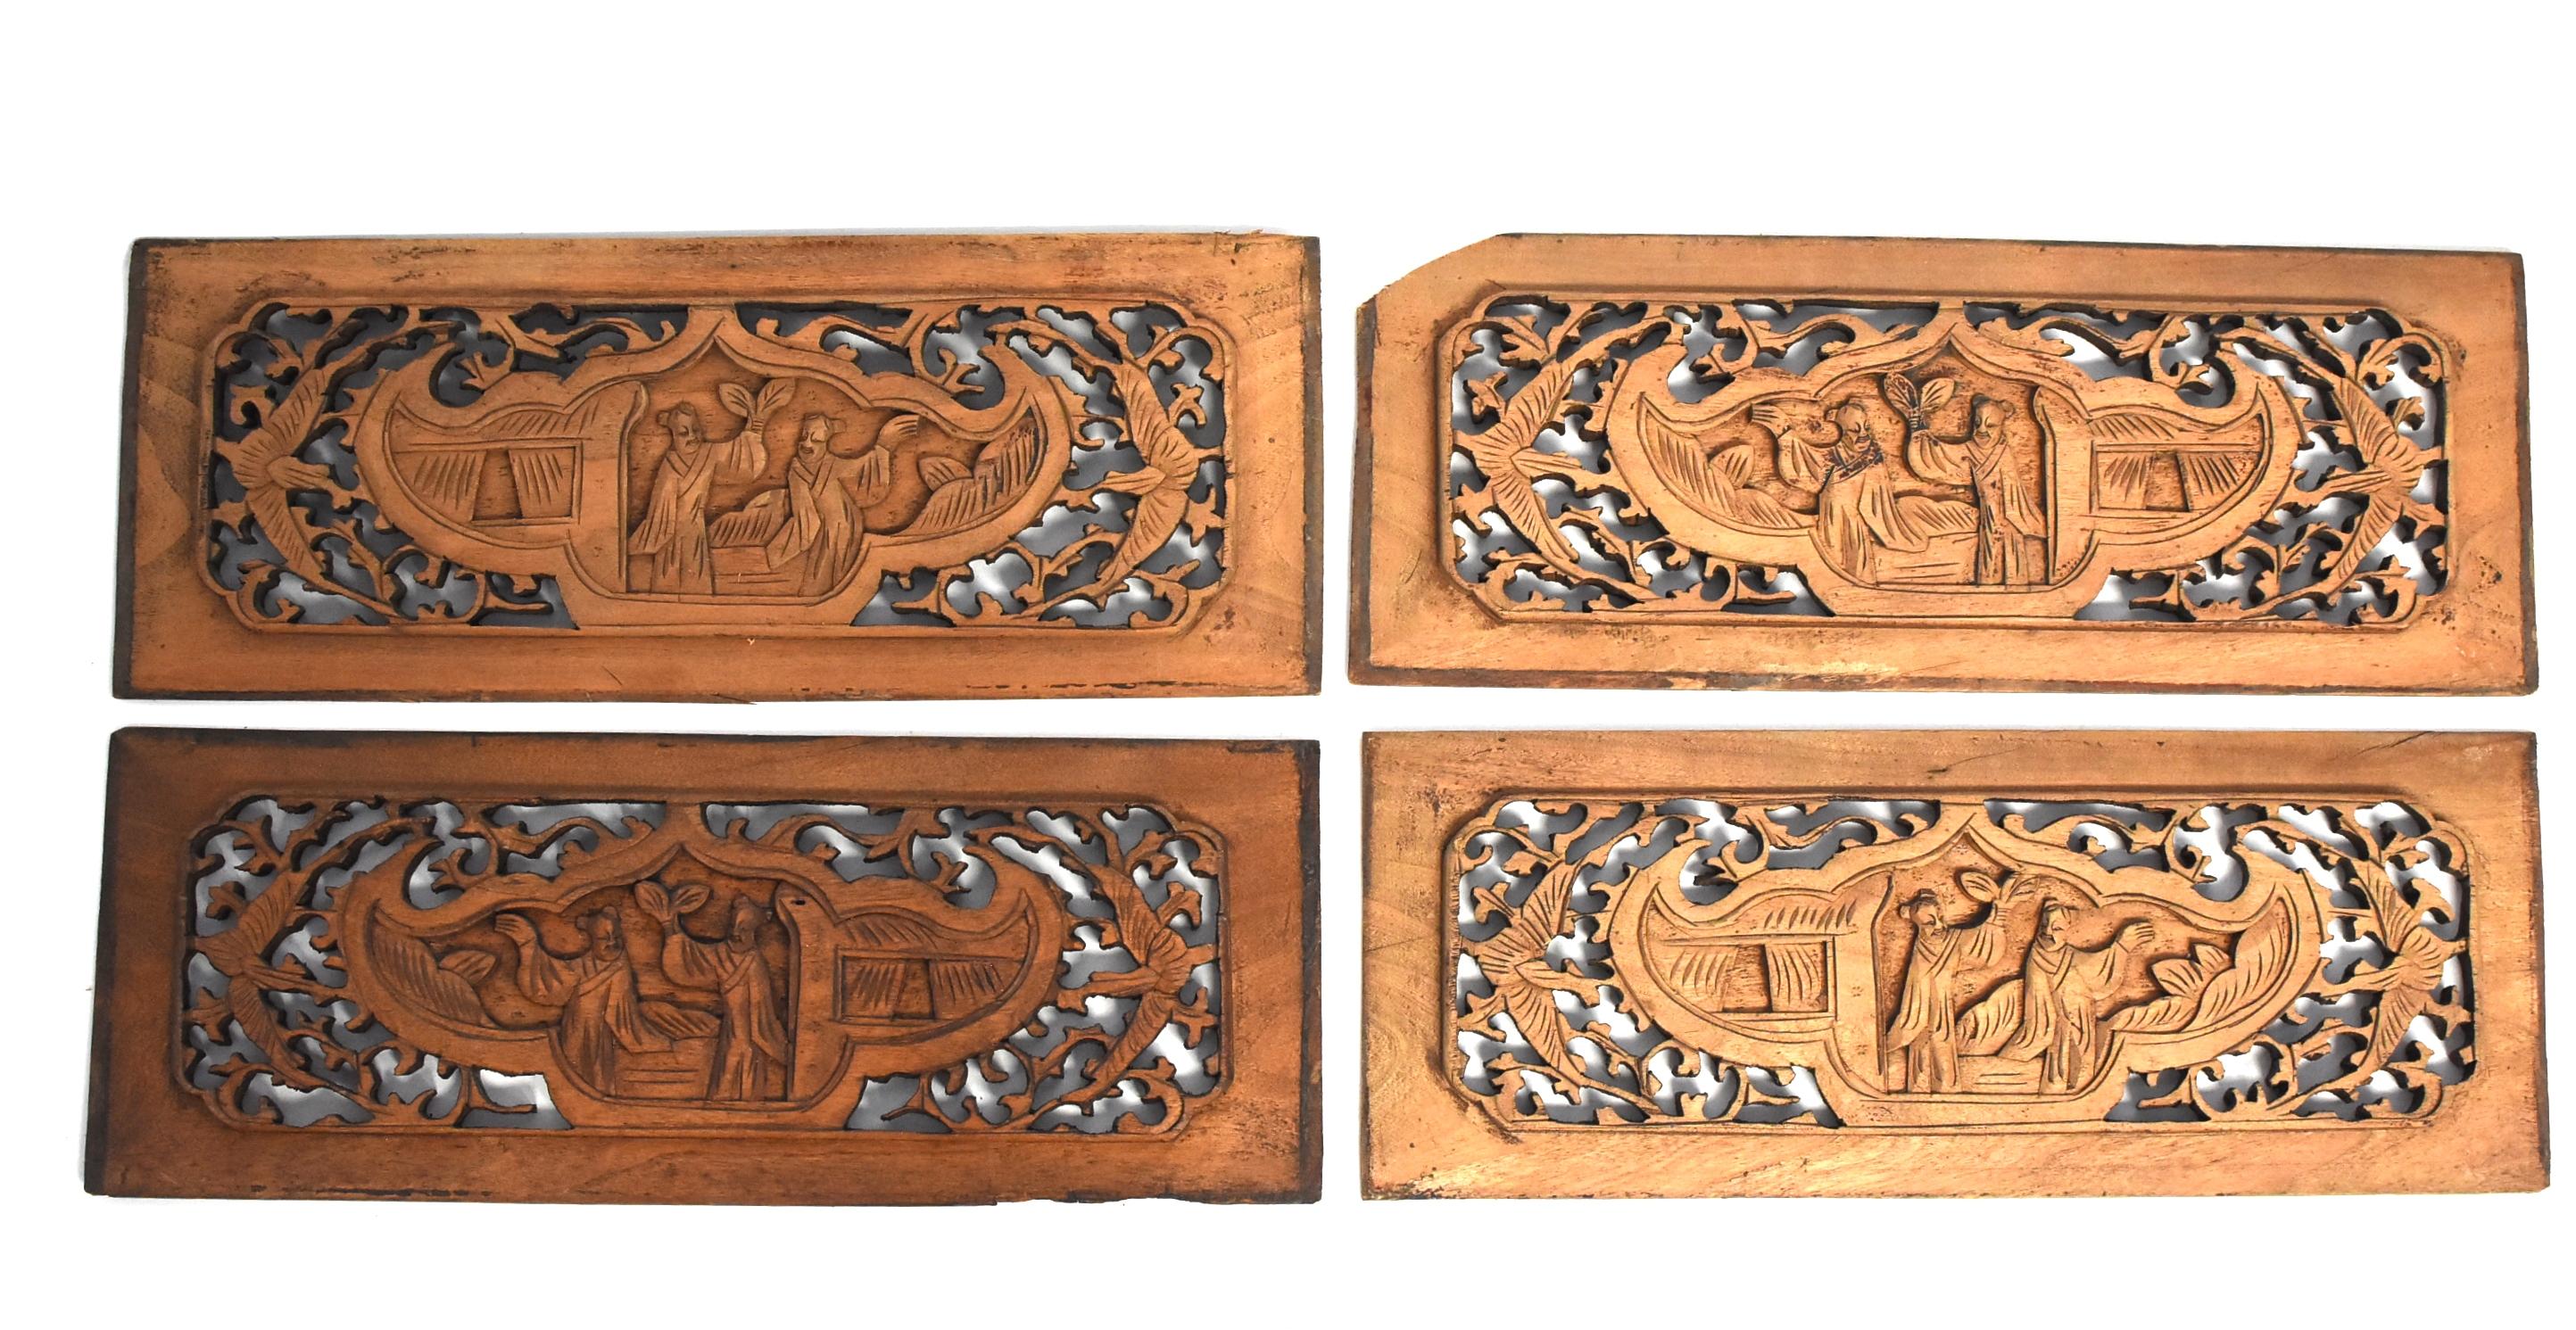 A wonderful set of four 19th century wood carvings each featuring two scholars in a garden pavilion. A combination of relief carving and pierced carving techniques are used in these pieces. The center in a treasure pot shape flanked by butterflies